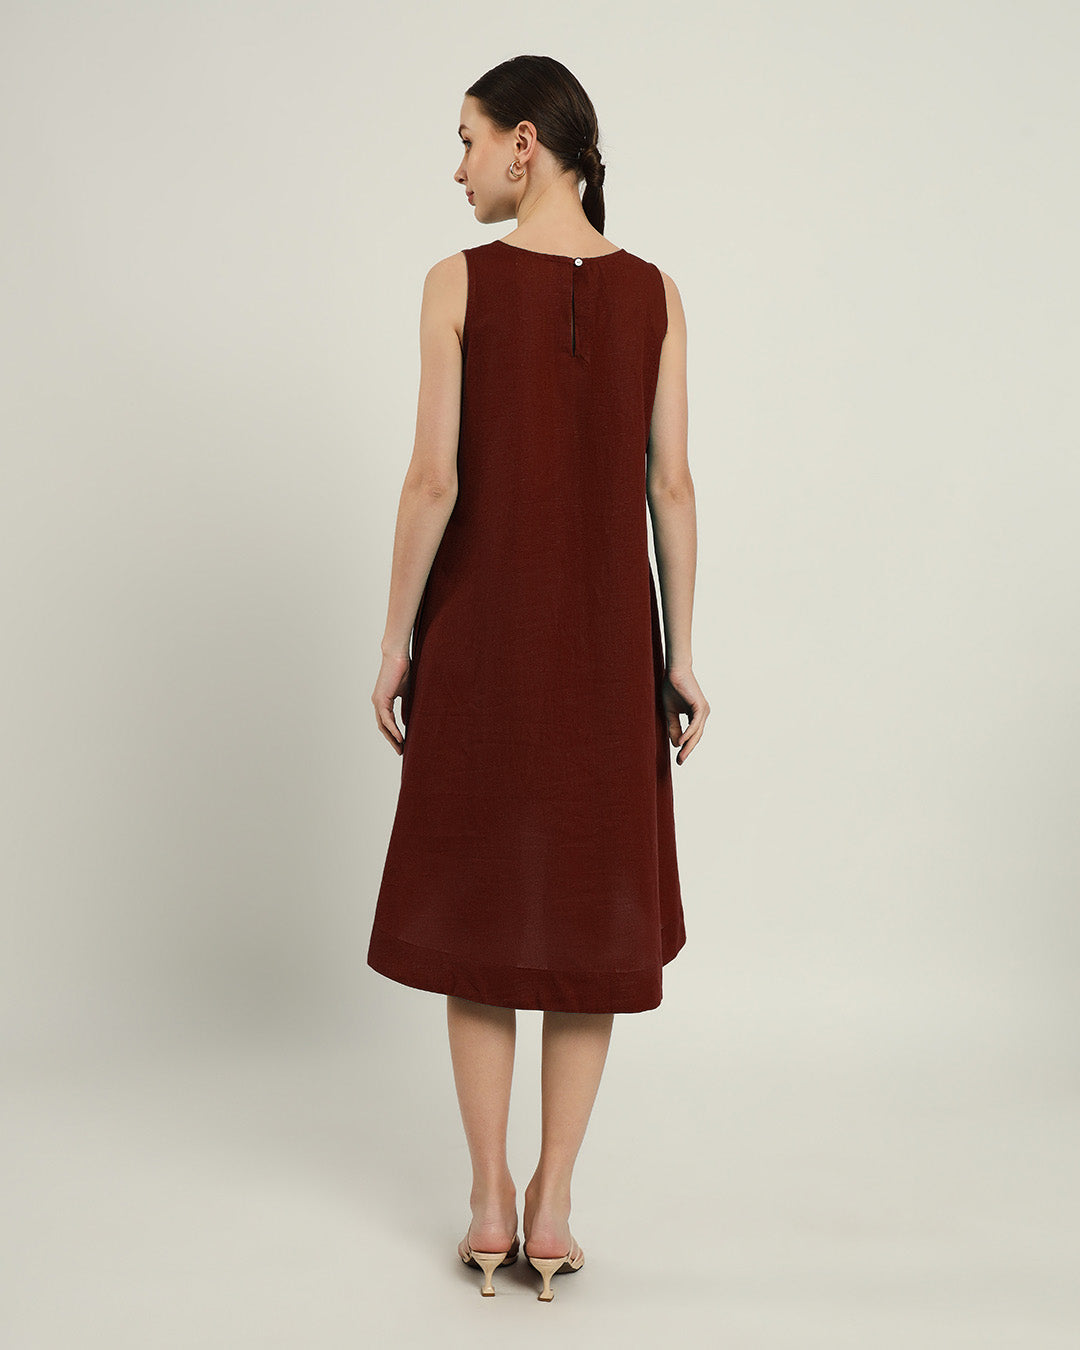 The Odesa Rouge Dress